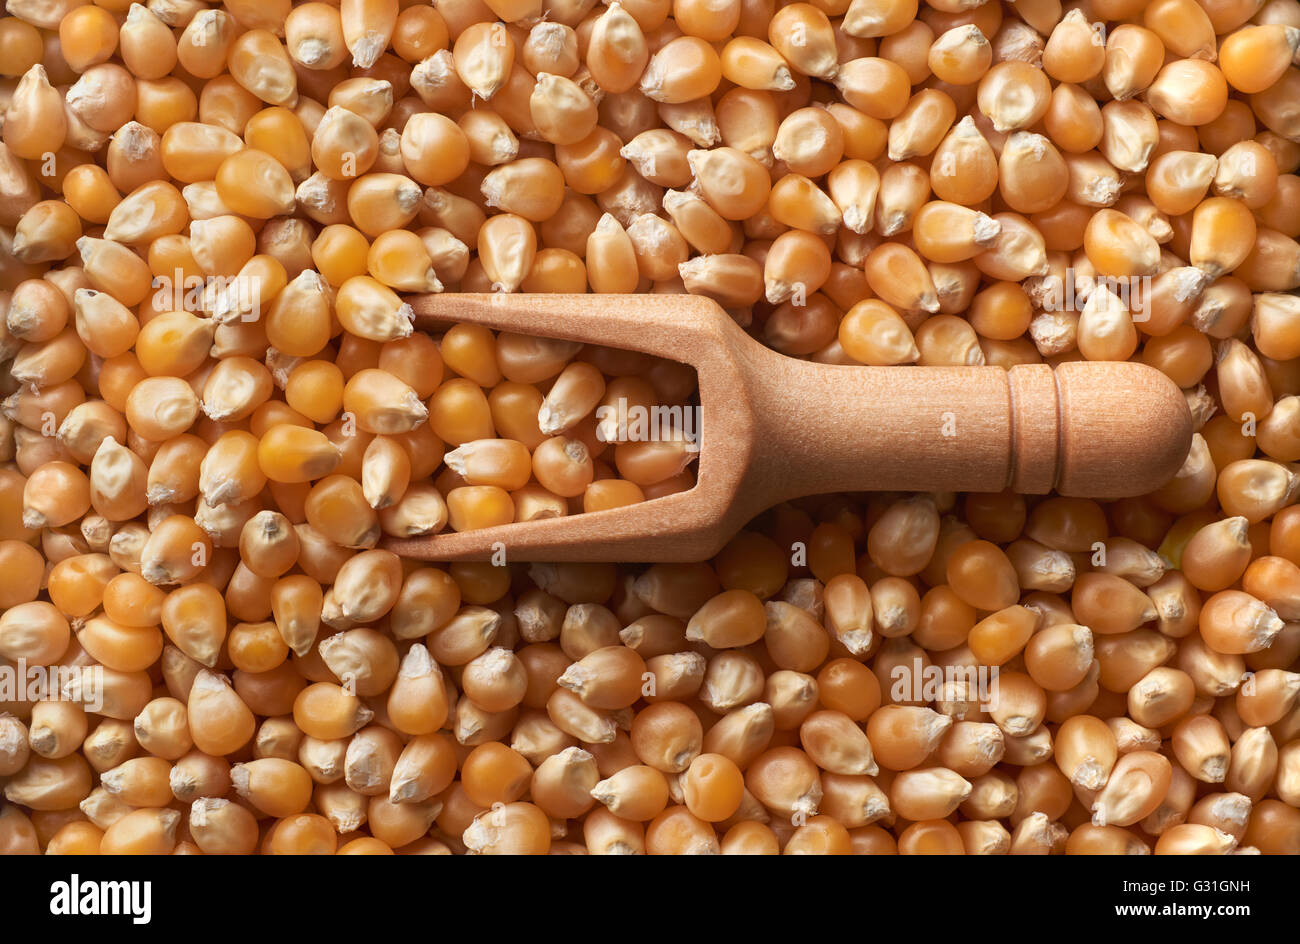 Food ingredients: wooden scoop and dried corn seeds arranged as flat background Stock Photo